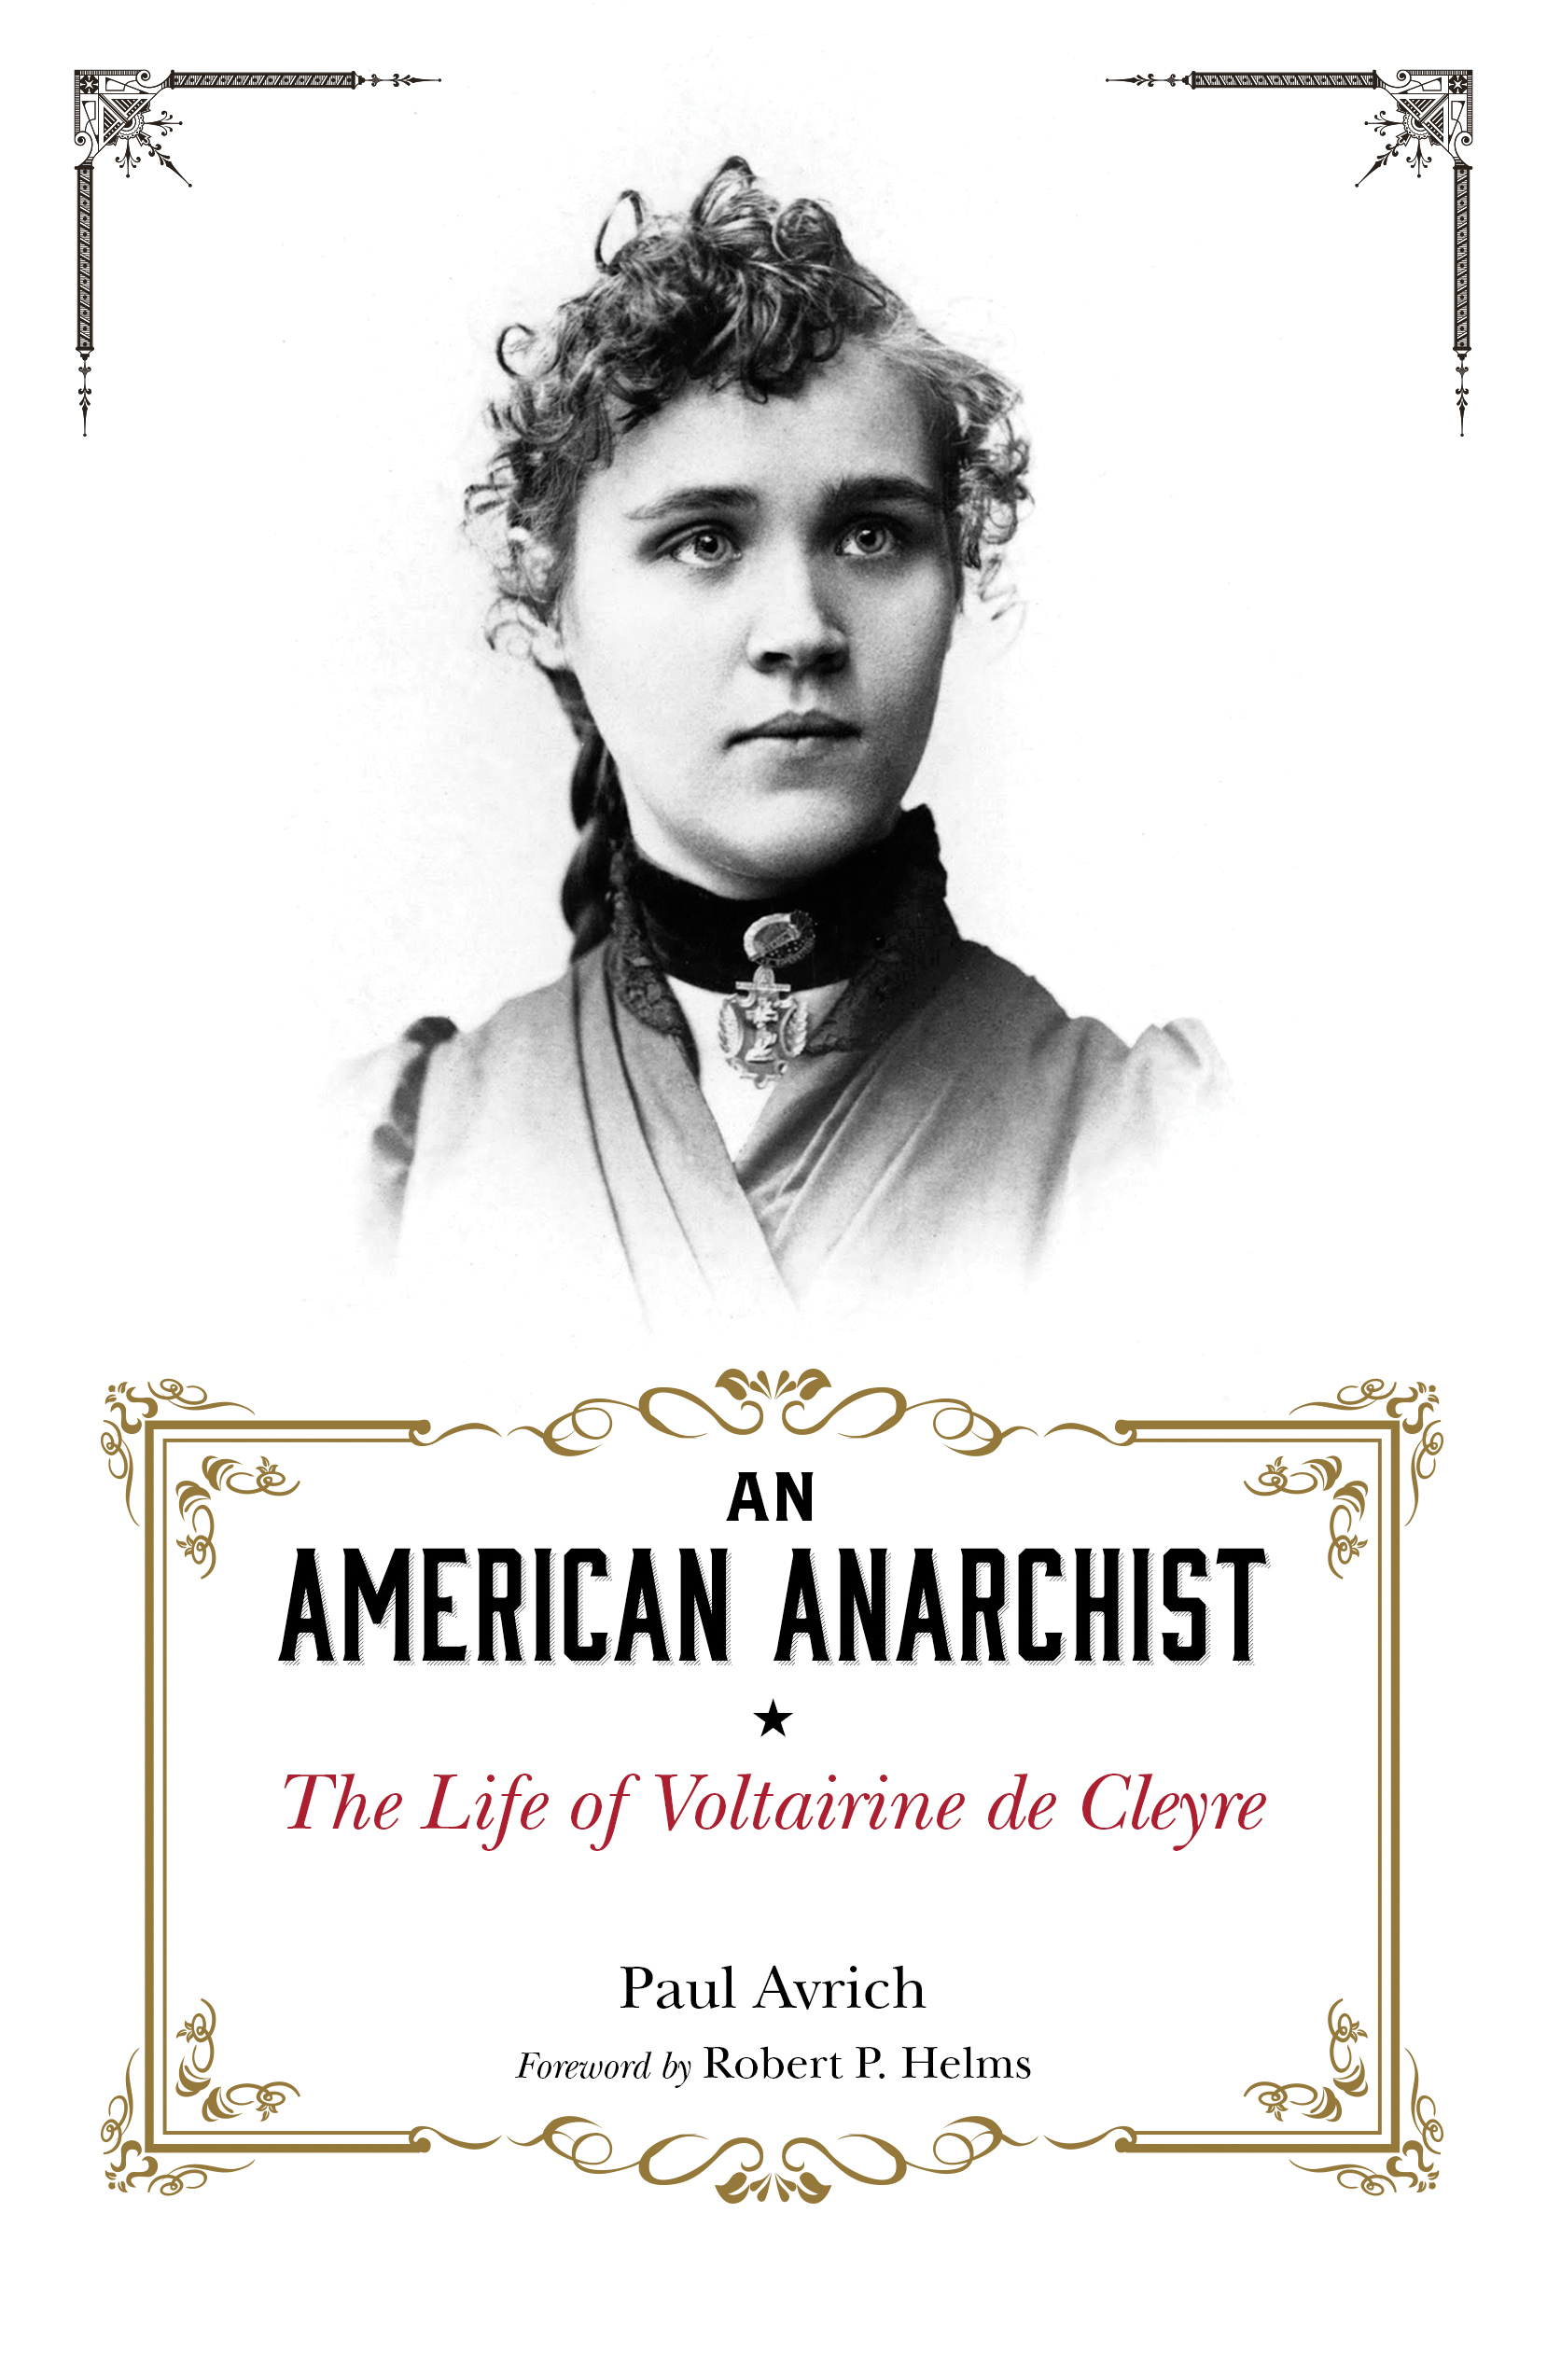 An American Anarchist The Life of Voltairine de Cleyre by Pau l Avrich - photo 1